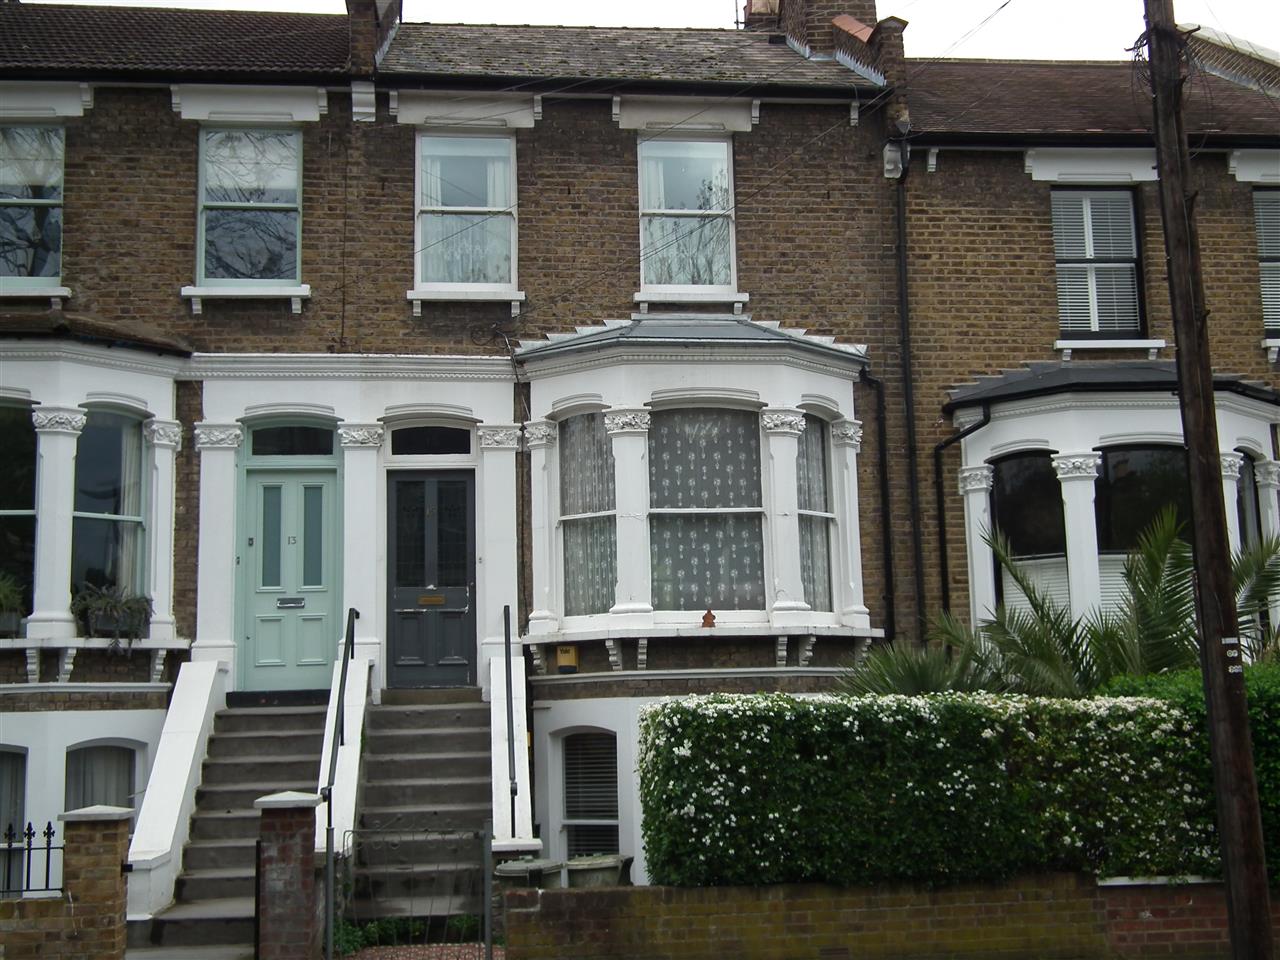 AVAILABLE FROM 8TH AUGUST 2020. Delightful Garden Flat! A well presented Garden flat located in a quiet tree lined turning within close proximity of Tufnell Park underground station (Northern Line) and the local shops, bars and restaurants on trendy Fortess Road. The accommodation comprises of ...